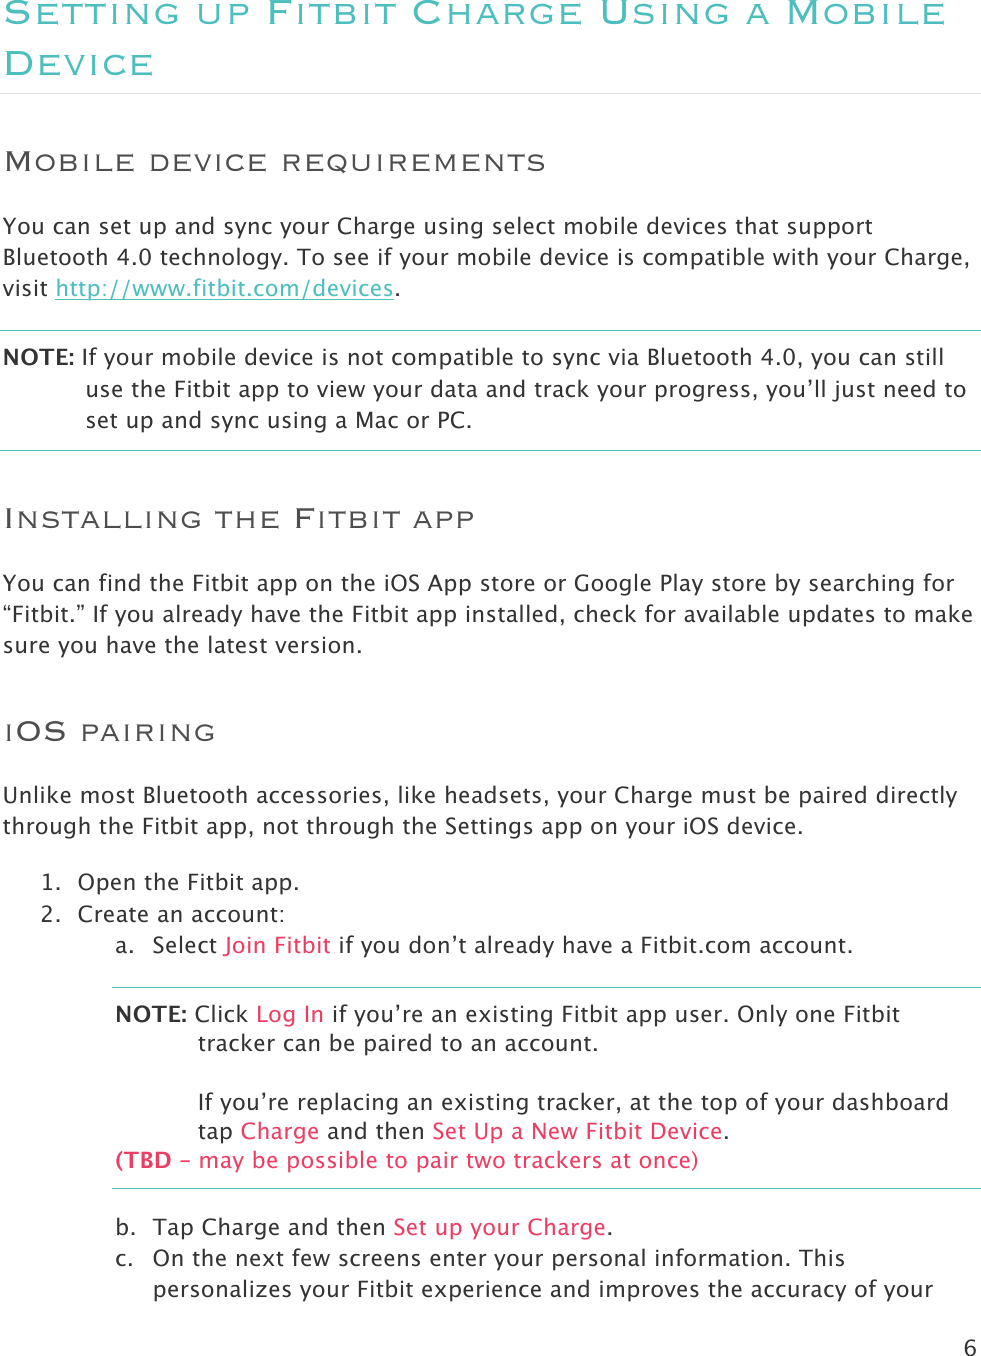 6  Setting up Fitbit Charge Using a Mobile Device Mobile device requirements You can set up and sync your Charge using select mobile devices that support Bluetooth 4.0 technology. To see if your mobile device is compatible with your Charge, visit http://www.fitbit.com/devices.  NOTE: If your mobile device is not compatible to sync via Bluetooth 4.0, you can still use the Fitbit app to view your data and track your progress, you’ll just need to set up and sync using a Mac or PC.  Installing the Fitbit app You can find the Fitbit app on the iOS App store or Google Play store by searching for “Fitbit.” If you already have the Fitbit app installed, check for available updates to make sure you have the latest version.  iOS pairing Unlike most Bluetooth accessories, like headsets, your Charge must be paired directly through the Fitbit app, not through the Settings app on your iOS device.  1. Open the Fitbit app. 2. Create an account: a. Select Join Fitbit if you don’t already have a Fitbit.com account. NOTE: Click Log In if you’re an existing Fitbit app user. Only one Fitbit tracker can be paired to an account.  If you’re replacing an existing tracker, at the top of your dashboard tap Charge and then Set Up a New Fitbit Device. (TBD – may be possible to pair two trackers at once) b. Tap Charge and then Set up your Charge.  c. On the next few screens enter your personal information. This personalizes your Fitbit experience and improves the accuracy of your 